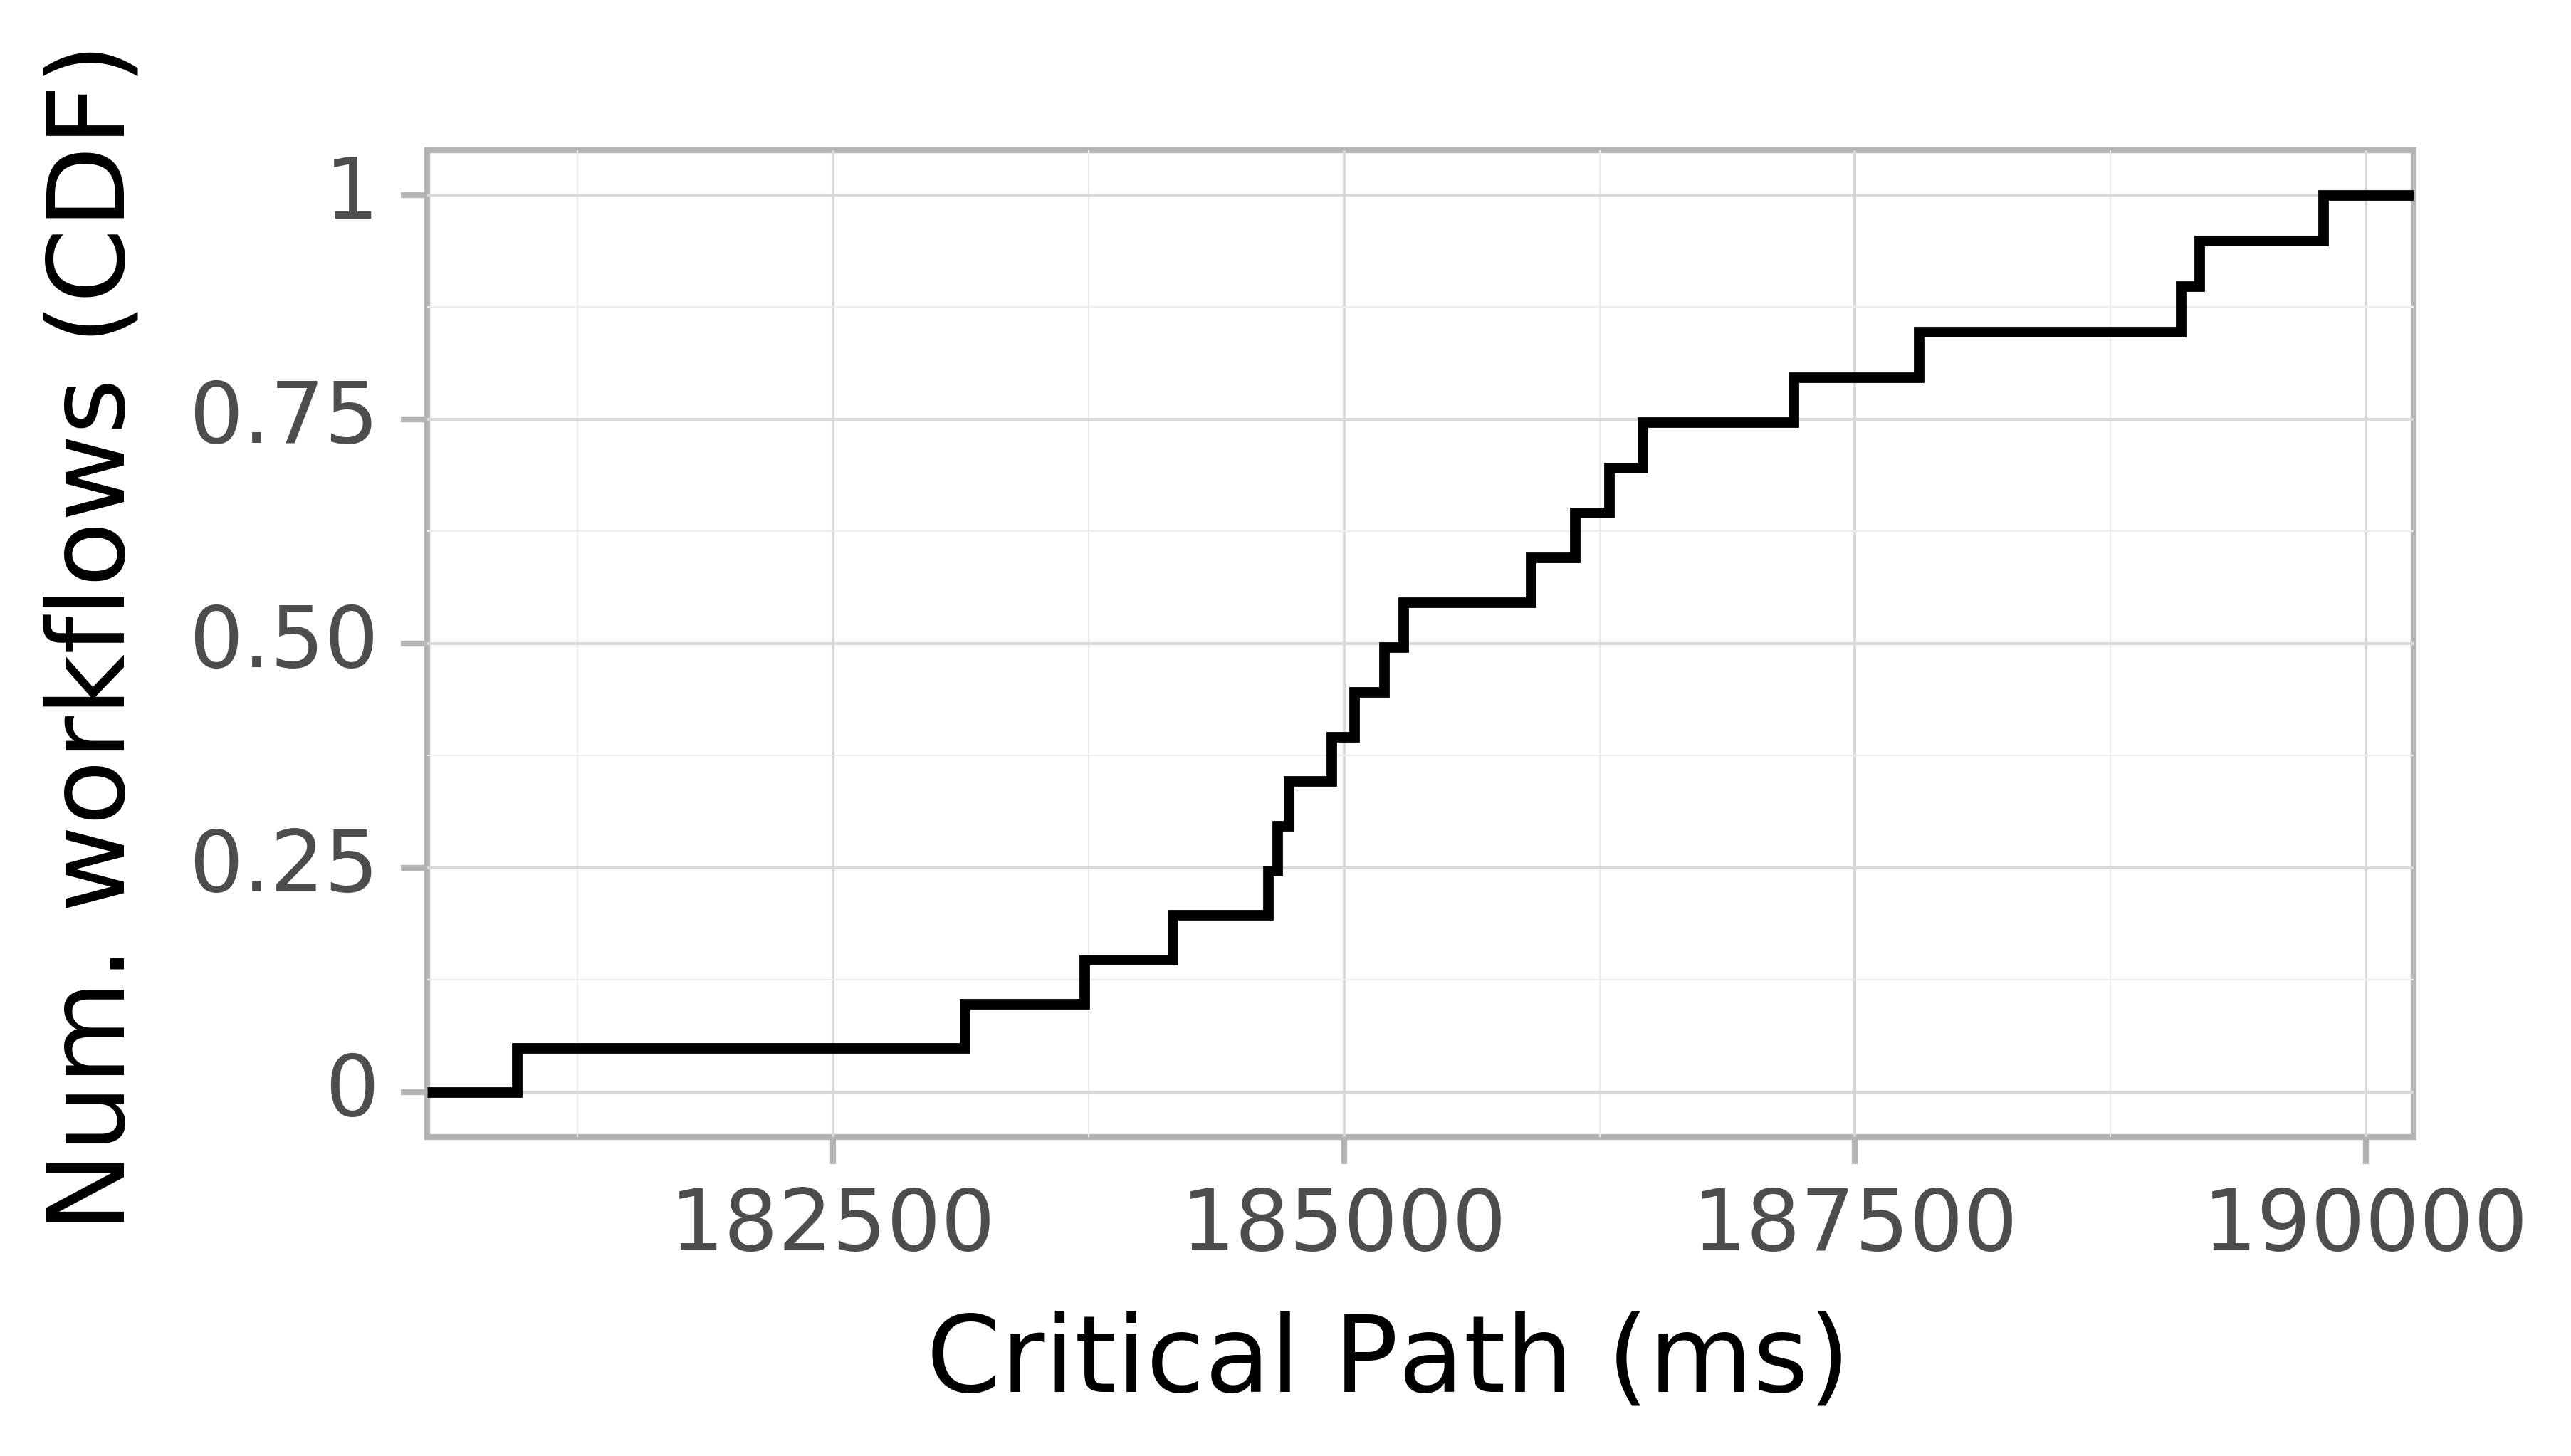 Job runtime CDF graph for the askalon-new_ee22 trace.